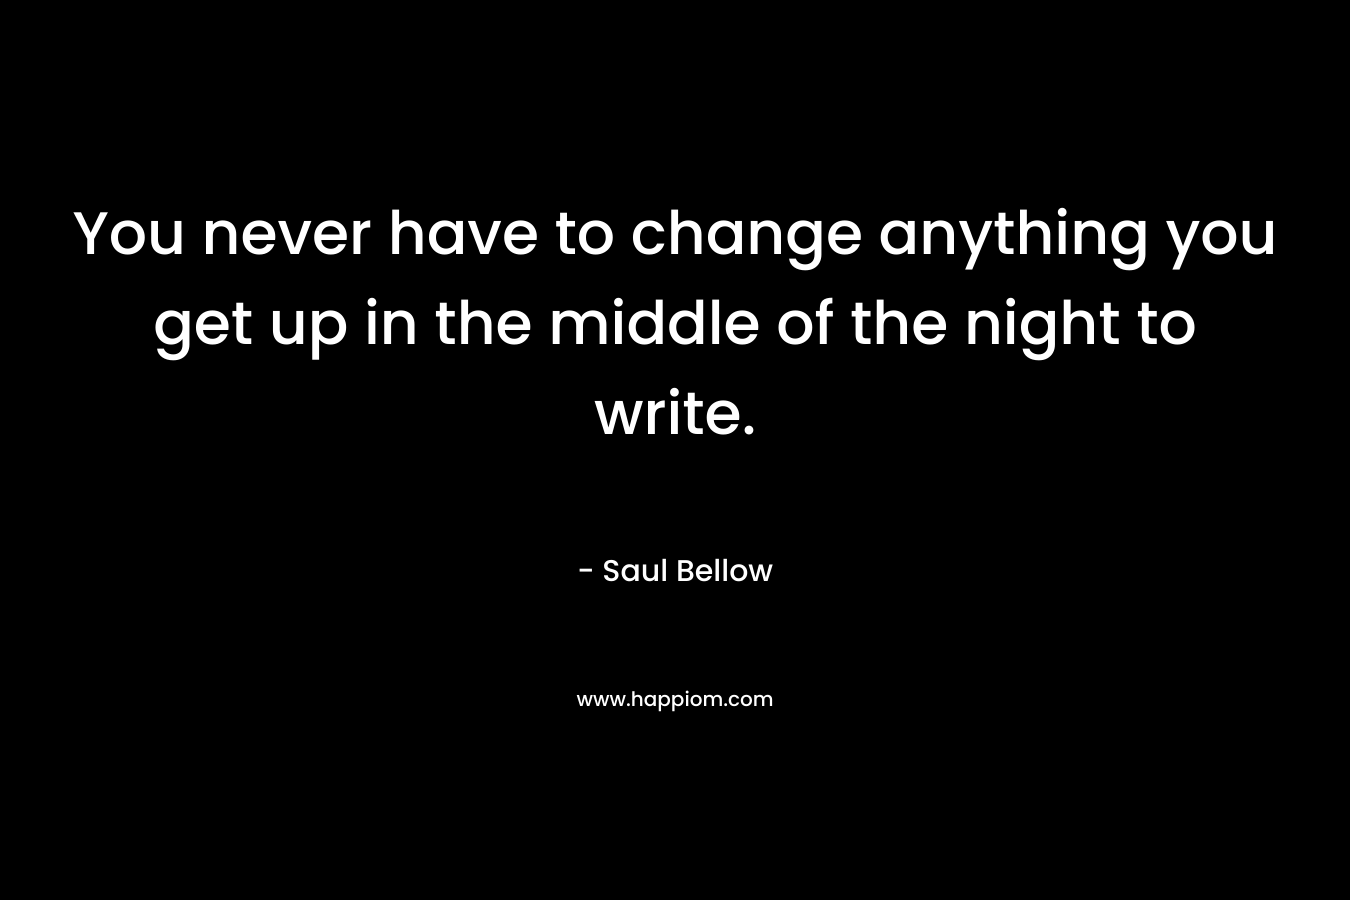 You never have to change anything you get up in the middle of the night to write. – Saul Bellow